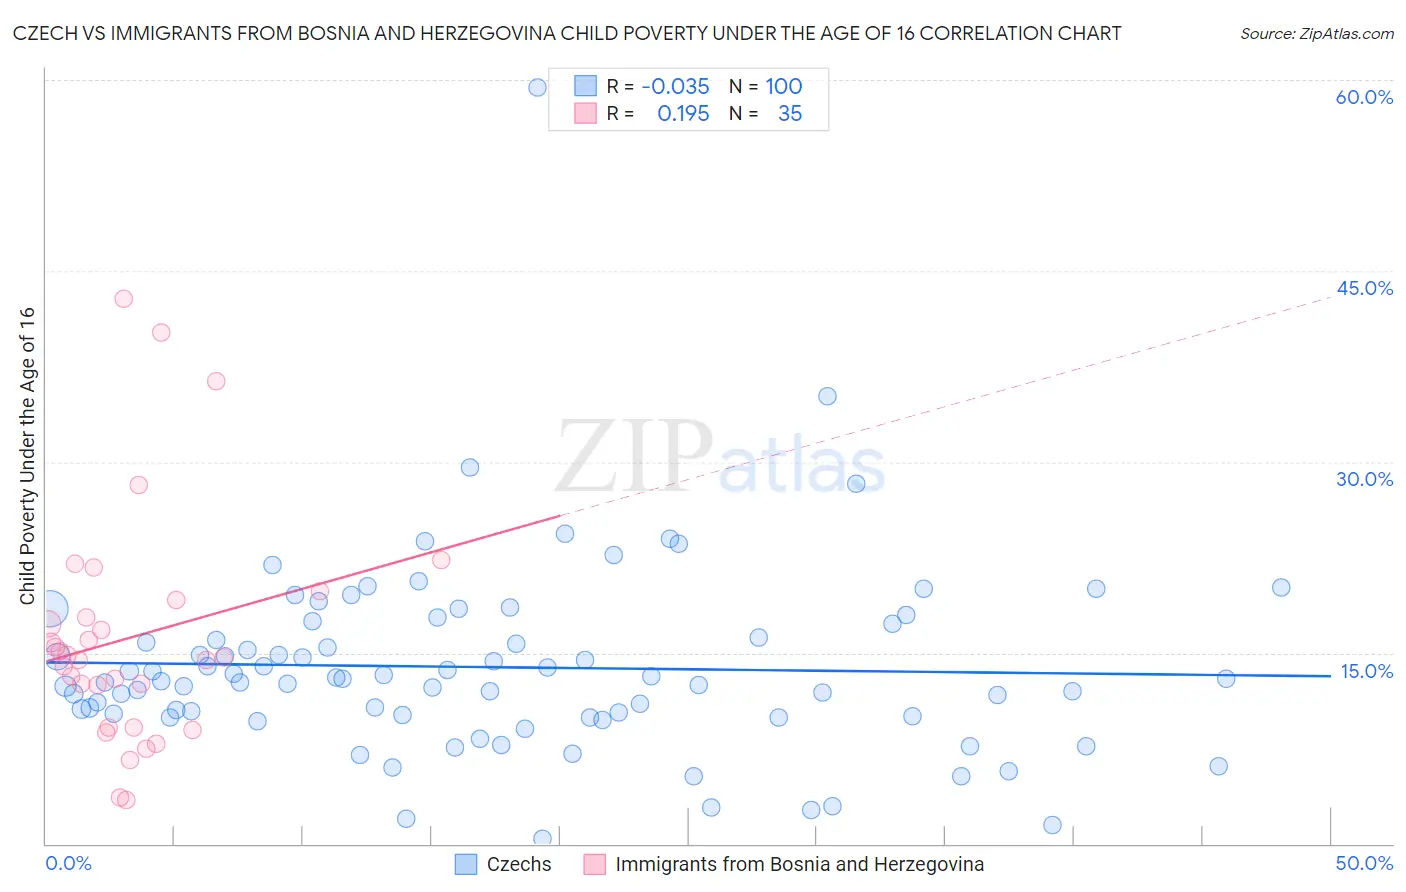 Czech vs Immigrants from Bosnia and Herzegovina Child Poverty Under the Age of 16